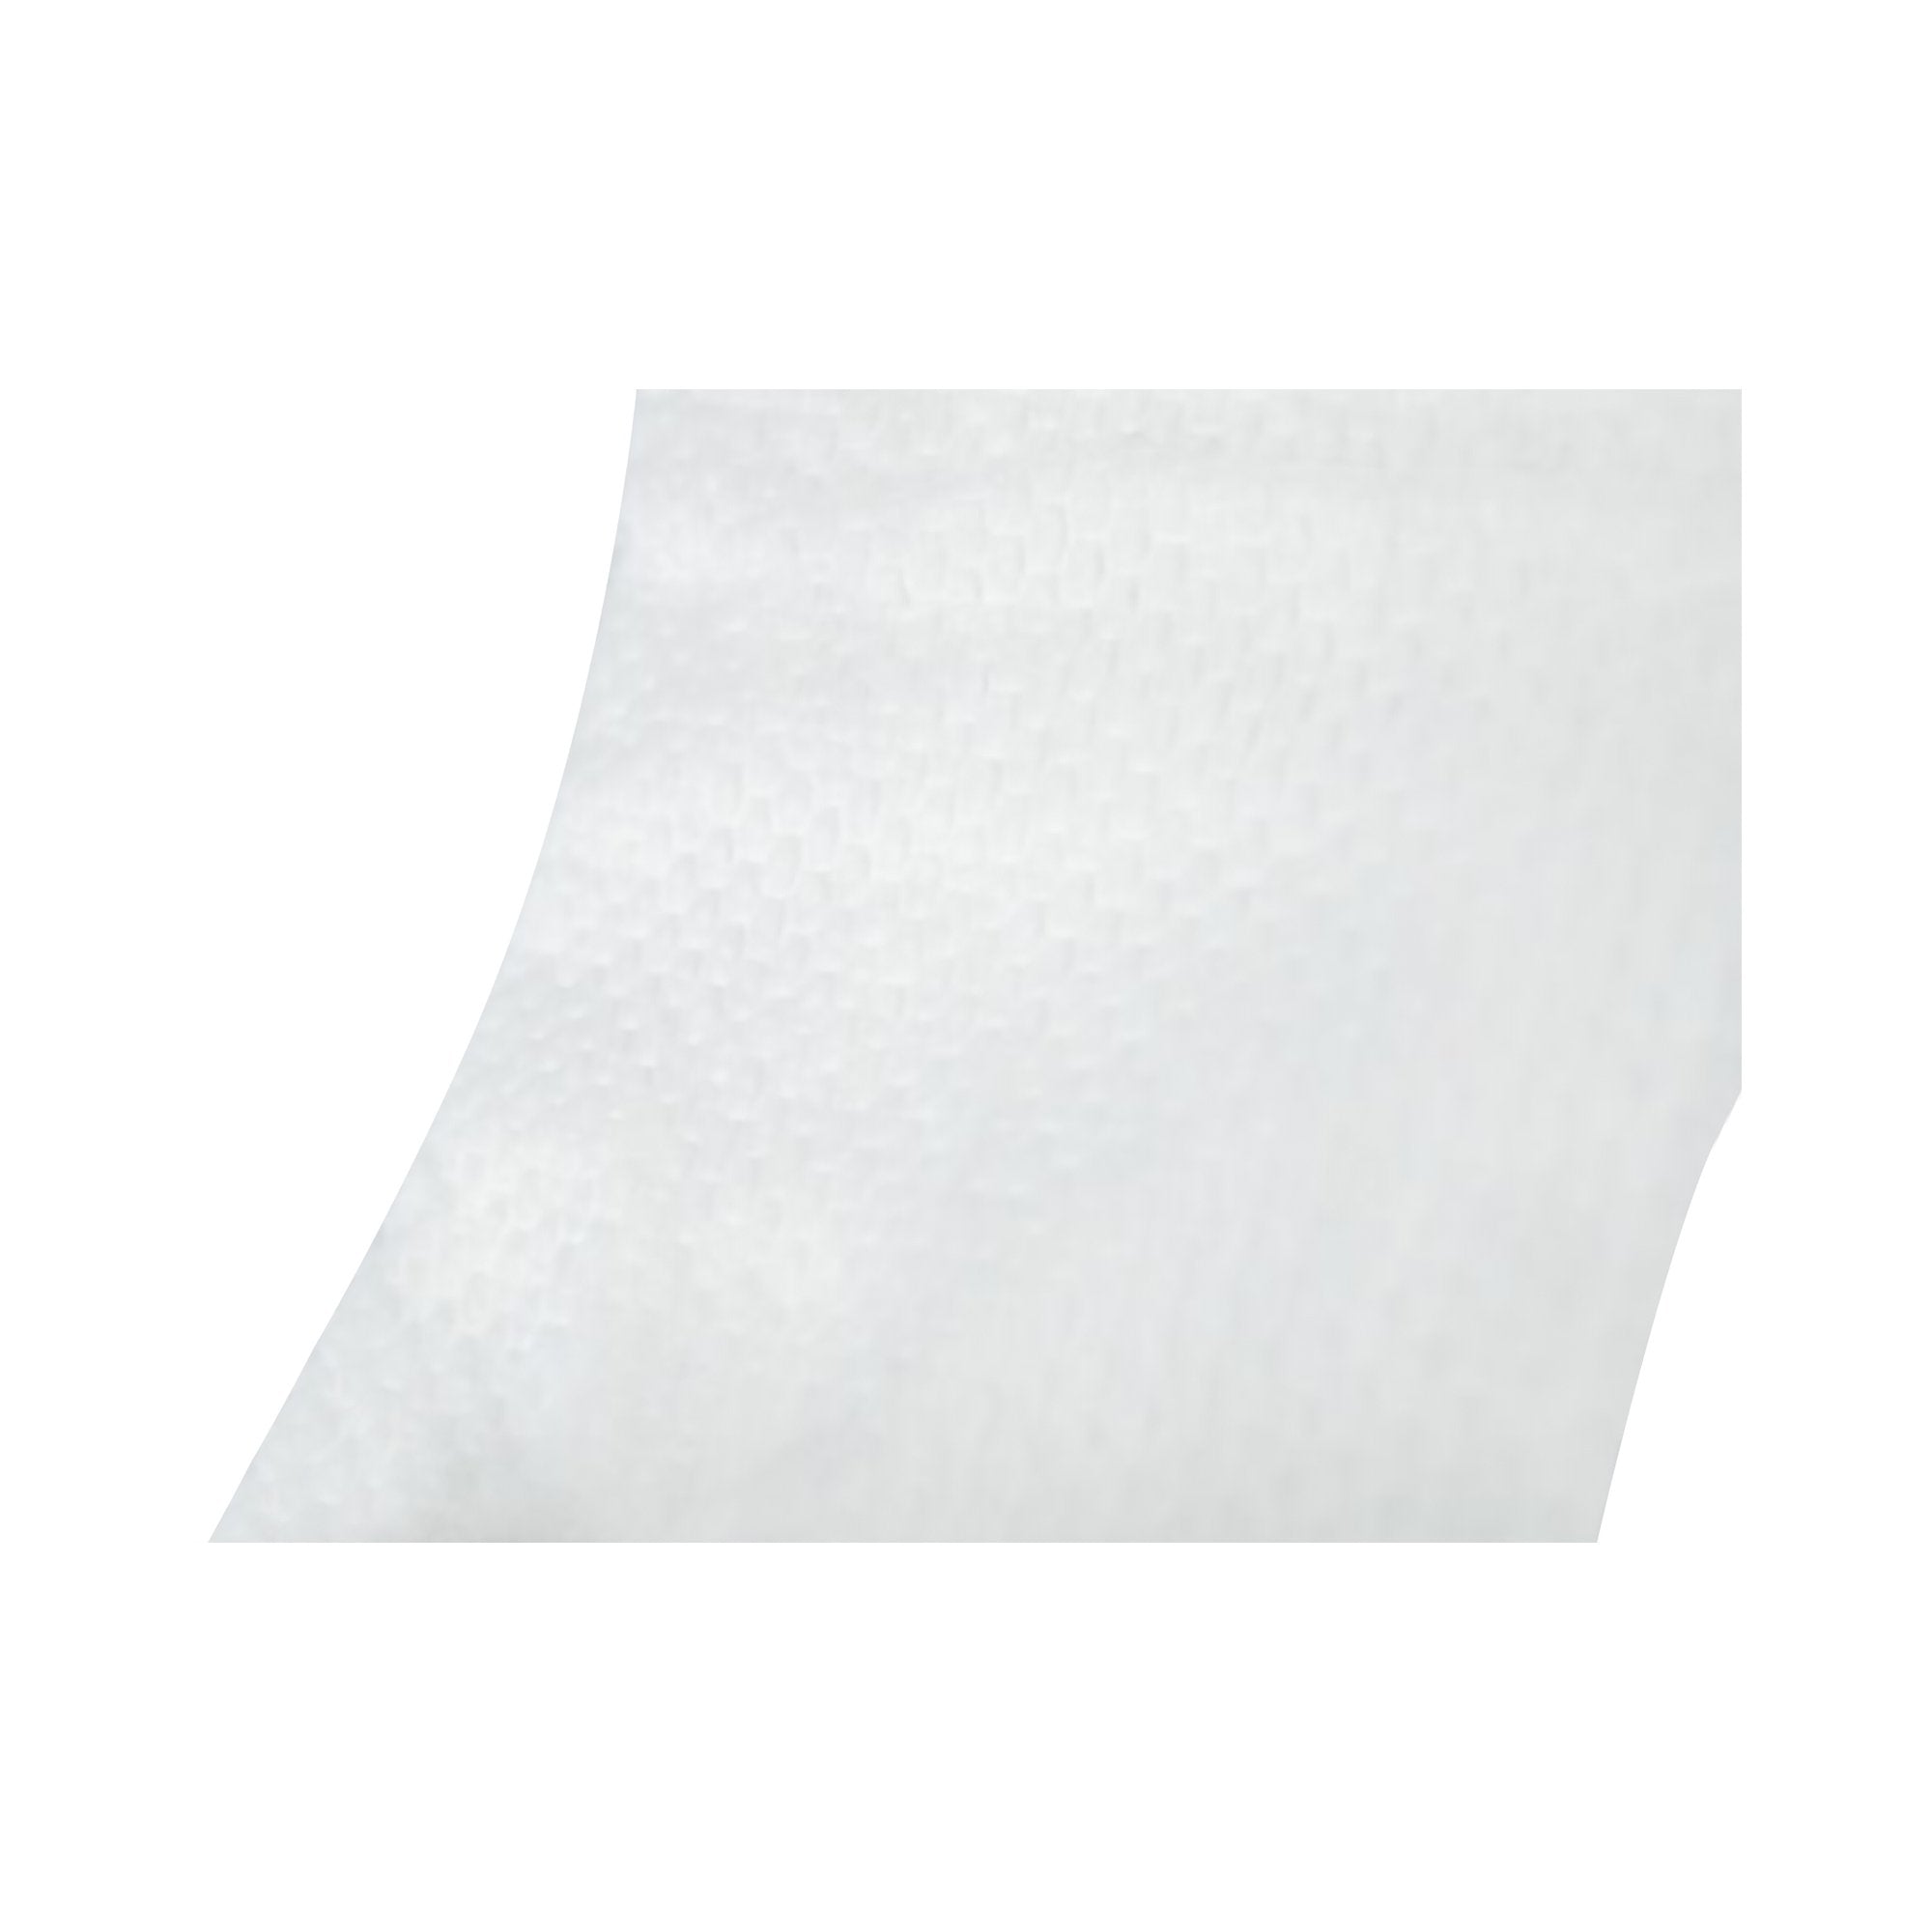 Booster Pad TotalDry™ Booster Pad Duo 12 Inch Length Heavy Absorbency SecureLoc Core One Size Fits Most